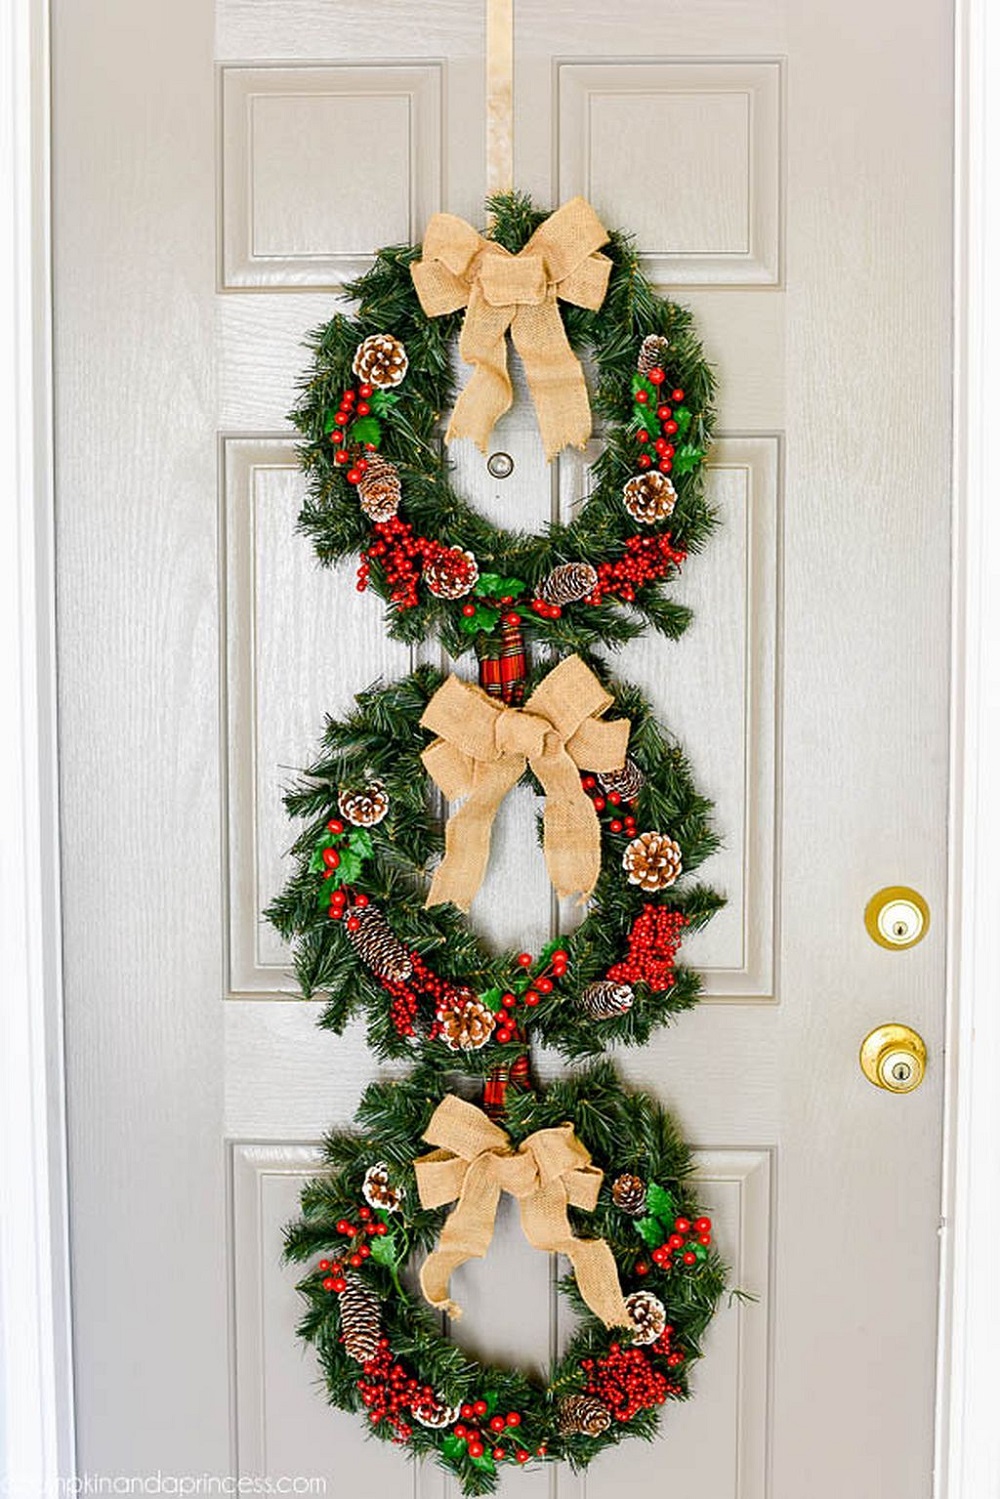 t5-9 Modern Christmas wreaths that you can decorate your home with